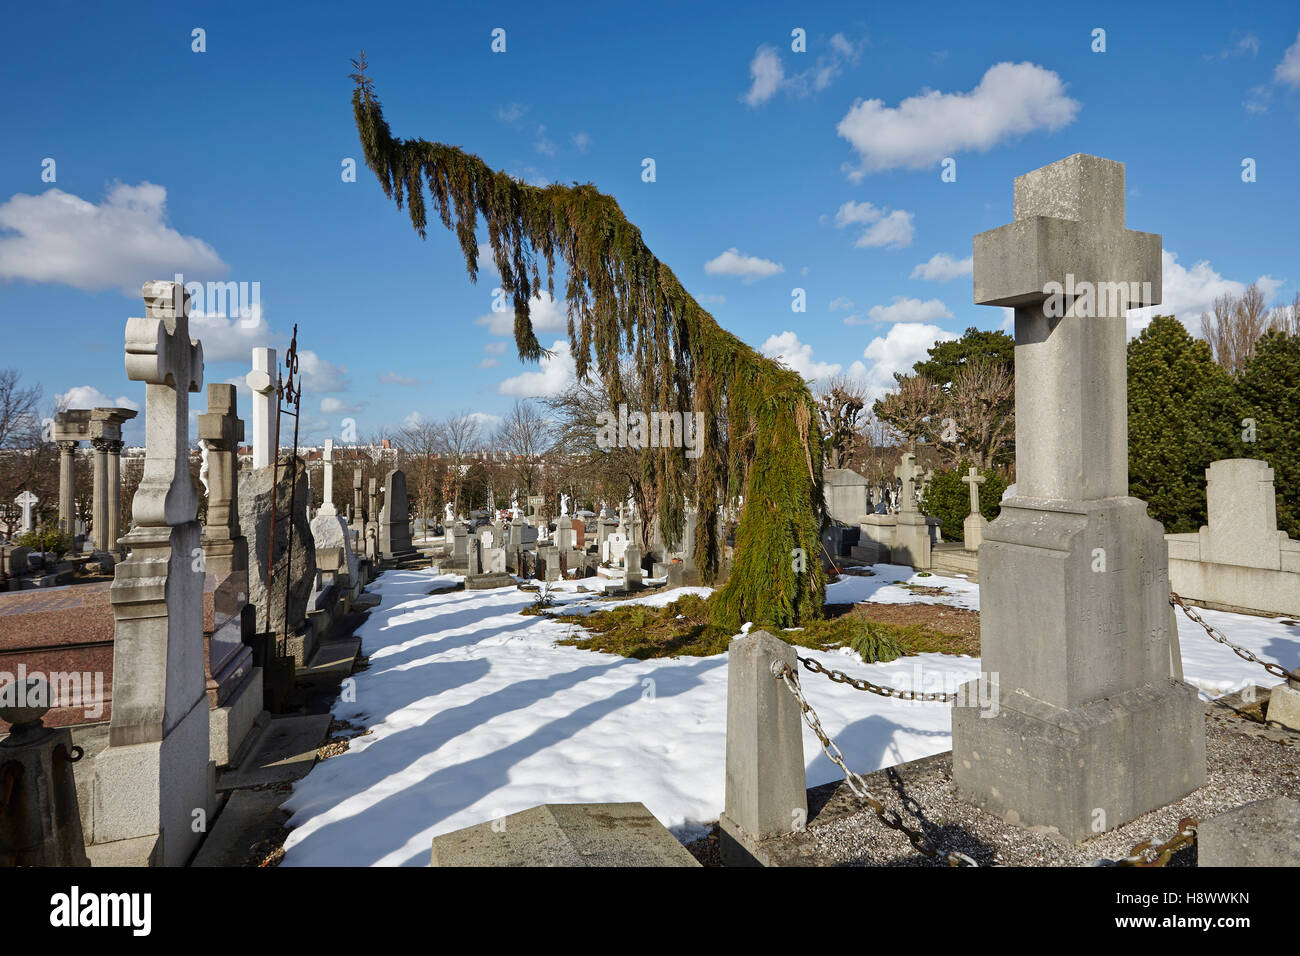 Weeping Giant sequoia (Sequoiadendron giganteum pendulum) in a graveyard in winter, France Stock Photo